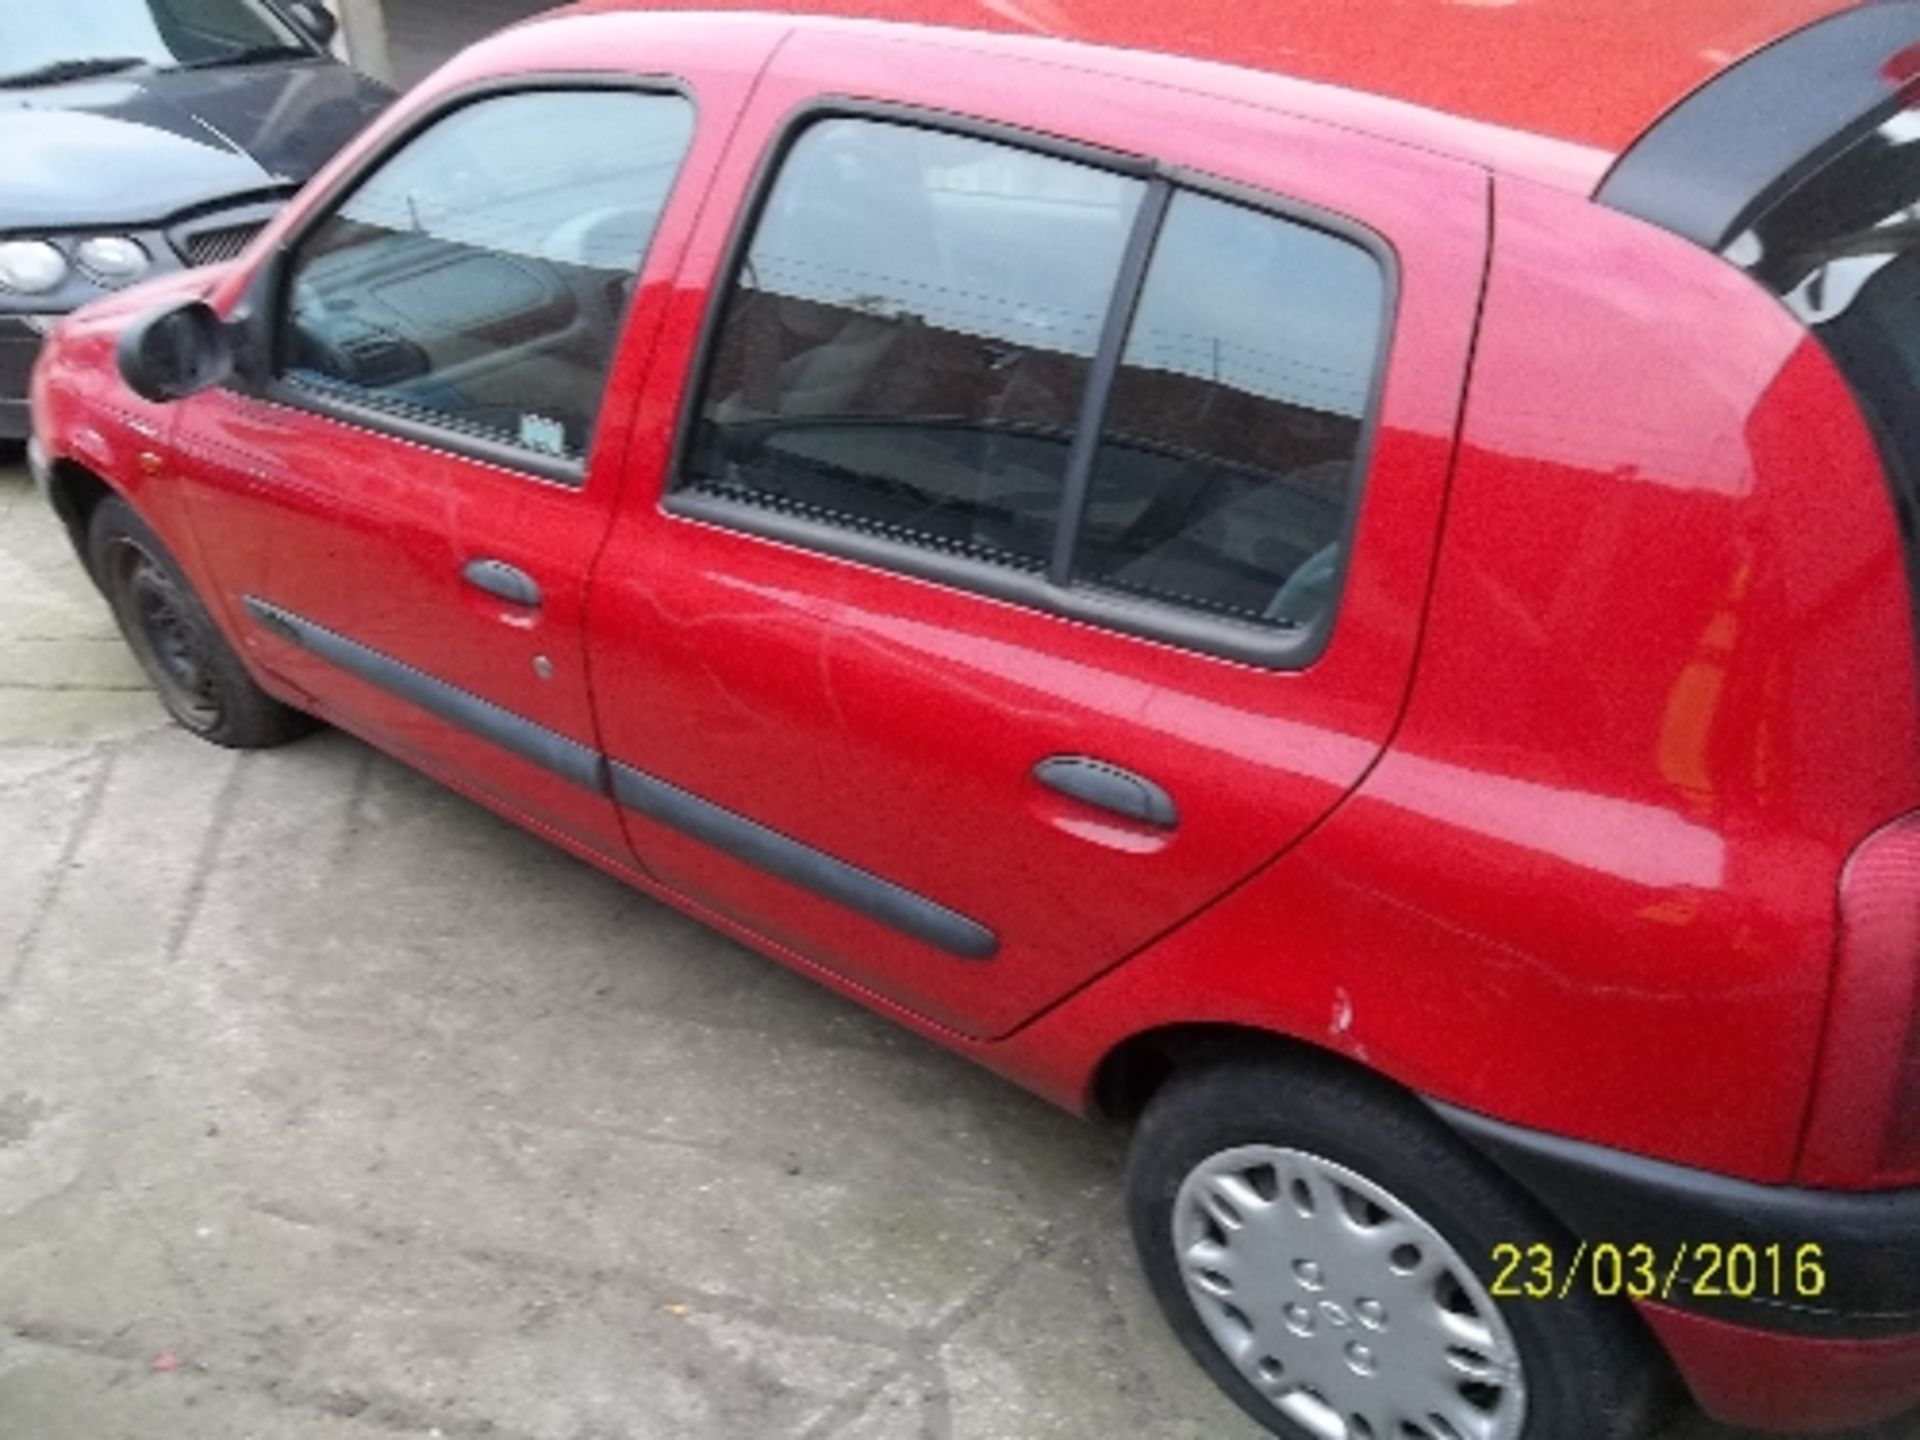 Renault Clio Alize - Y54 UOC Date of registration: 31.03.2001 1390cc, petrol, manual, red Odometer - Image 4 of 4